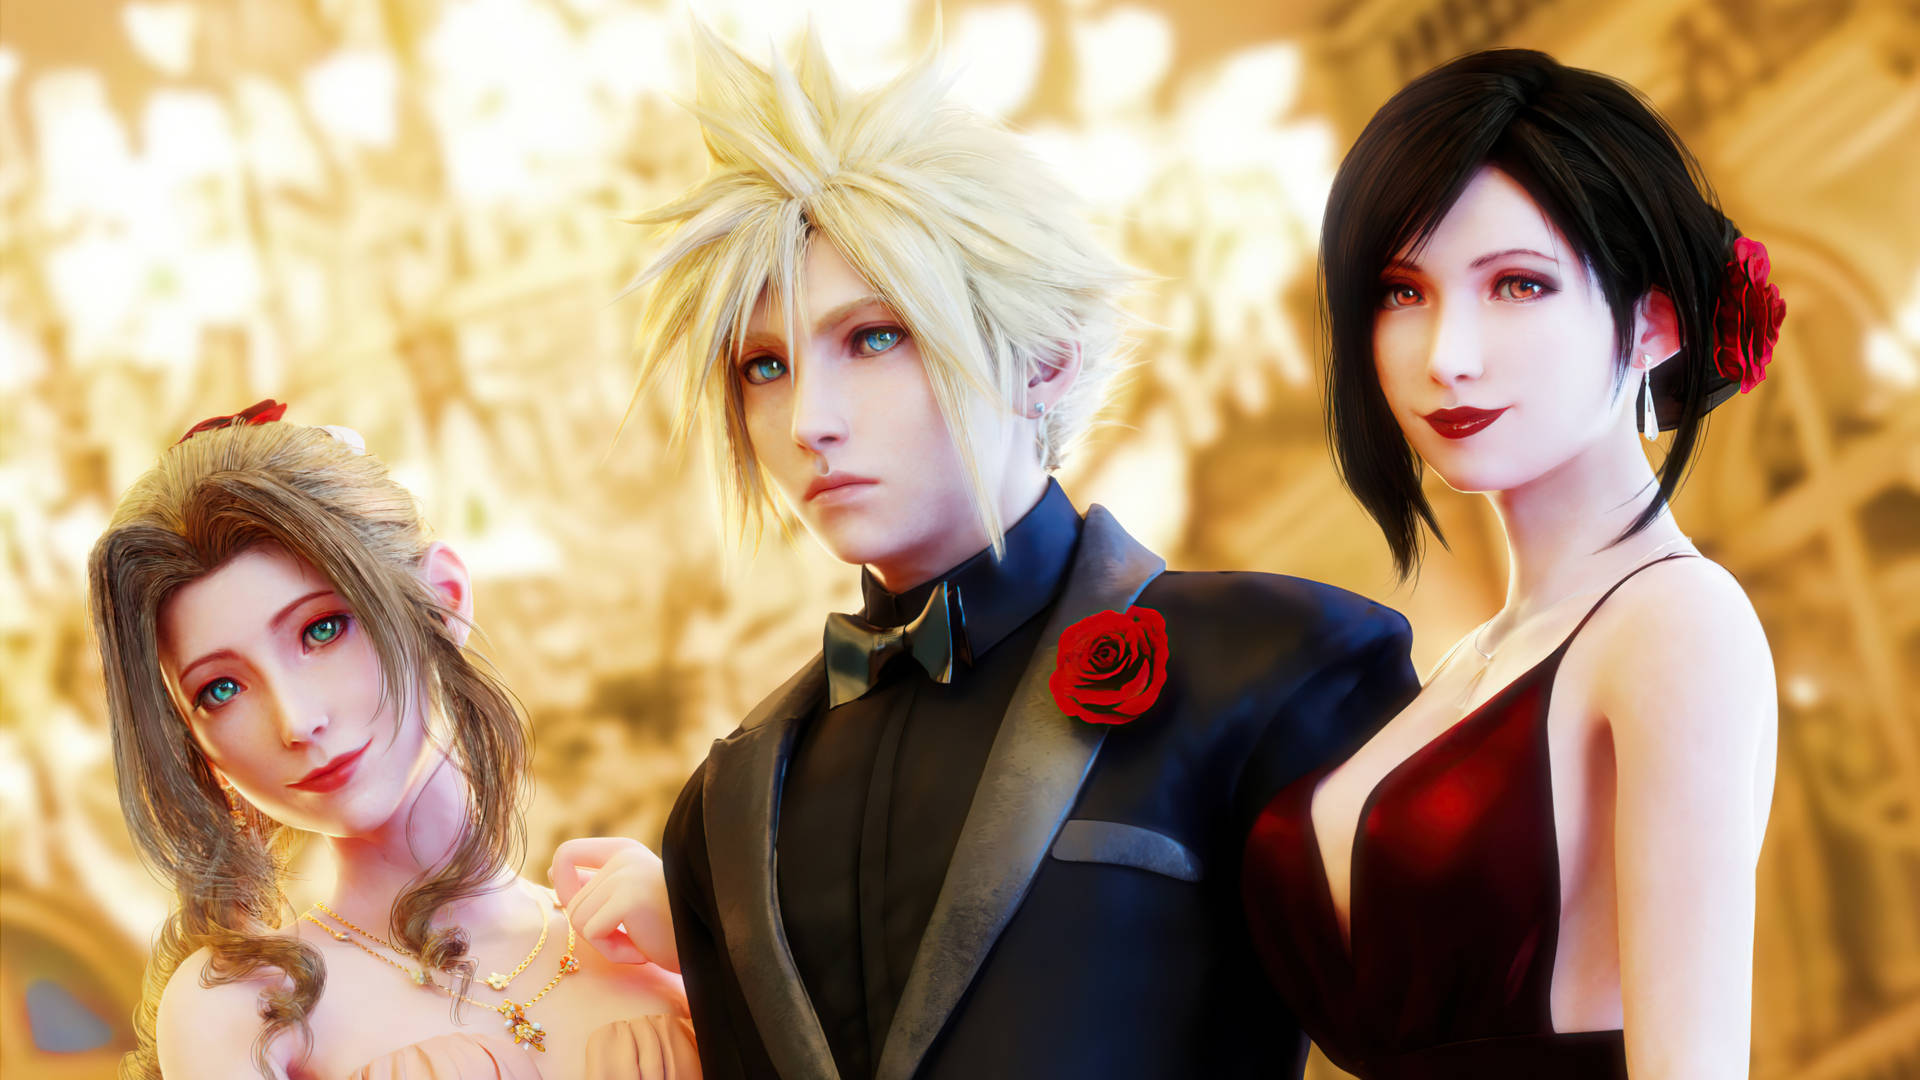 Final Fantasy 7 Formal Outfits Wallpaper